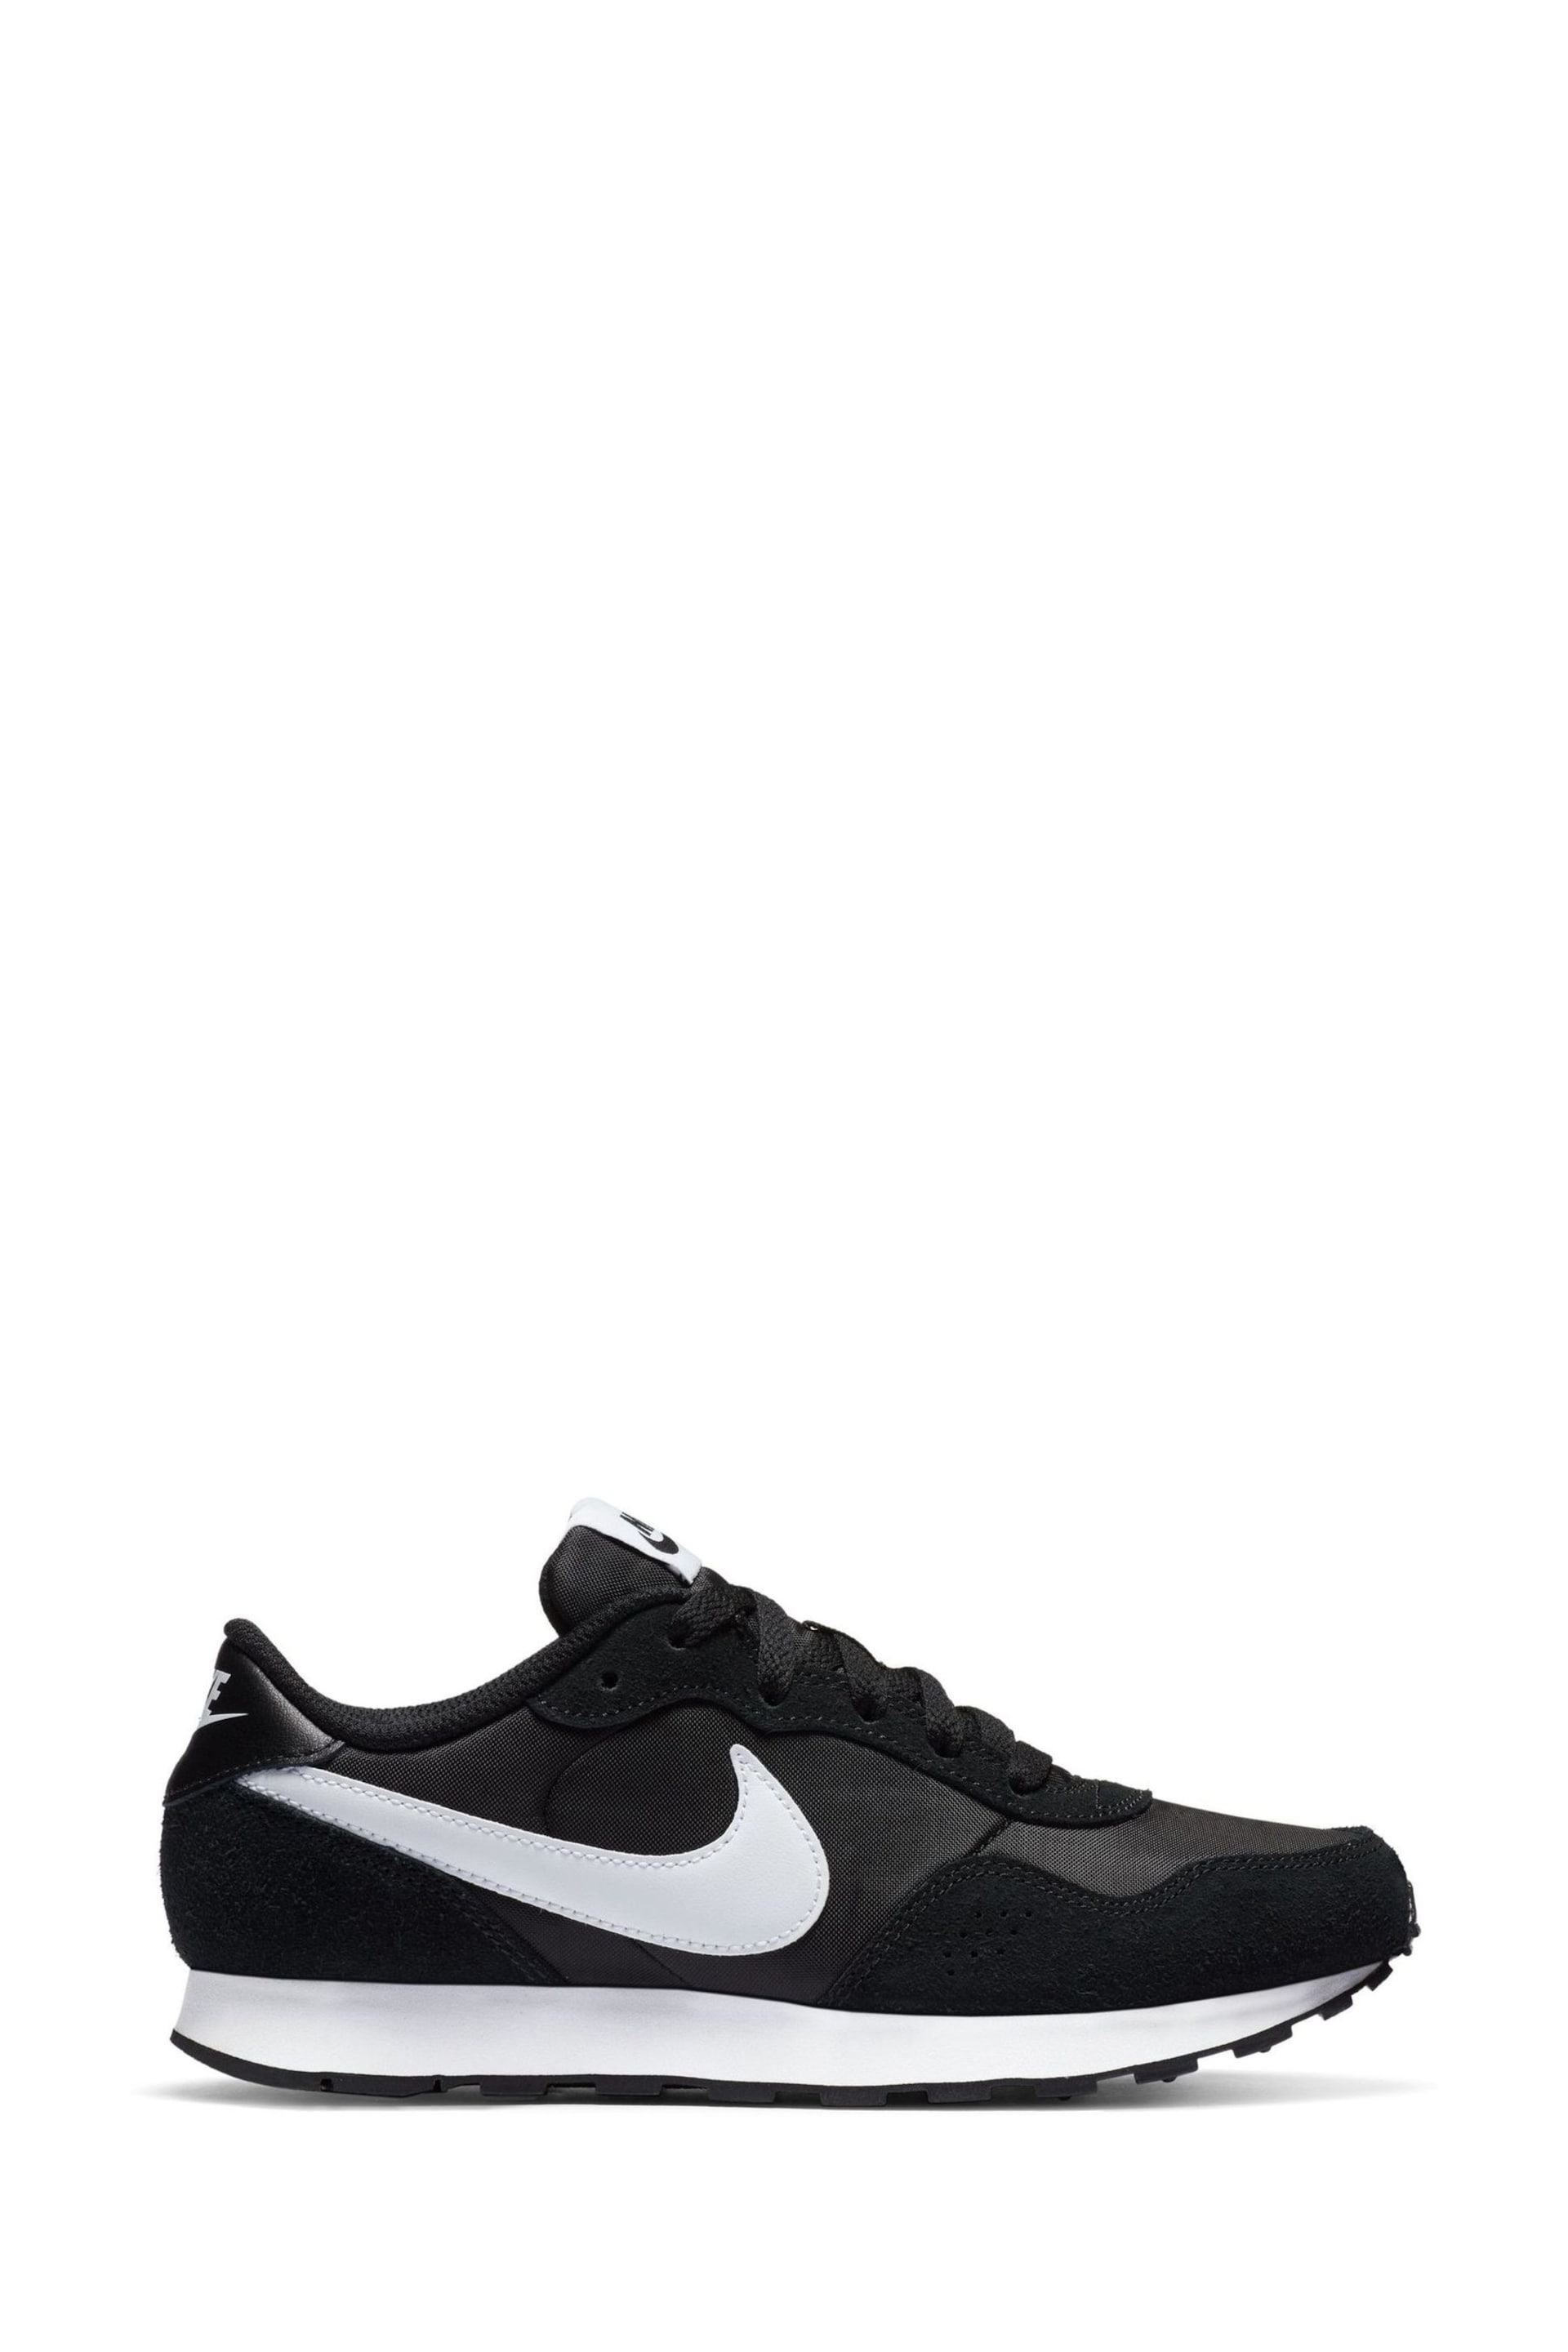 Nike Black/White Youth MD Valiant Trainers - Image 1 of 10